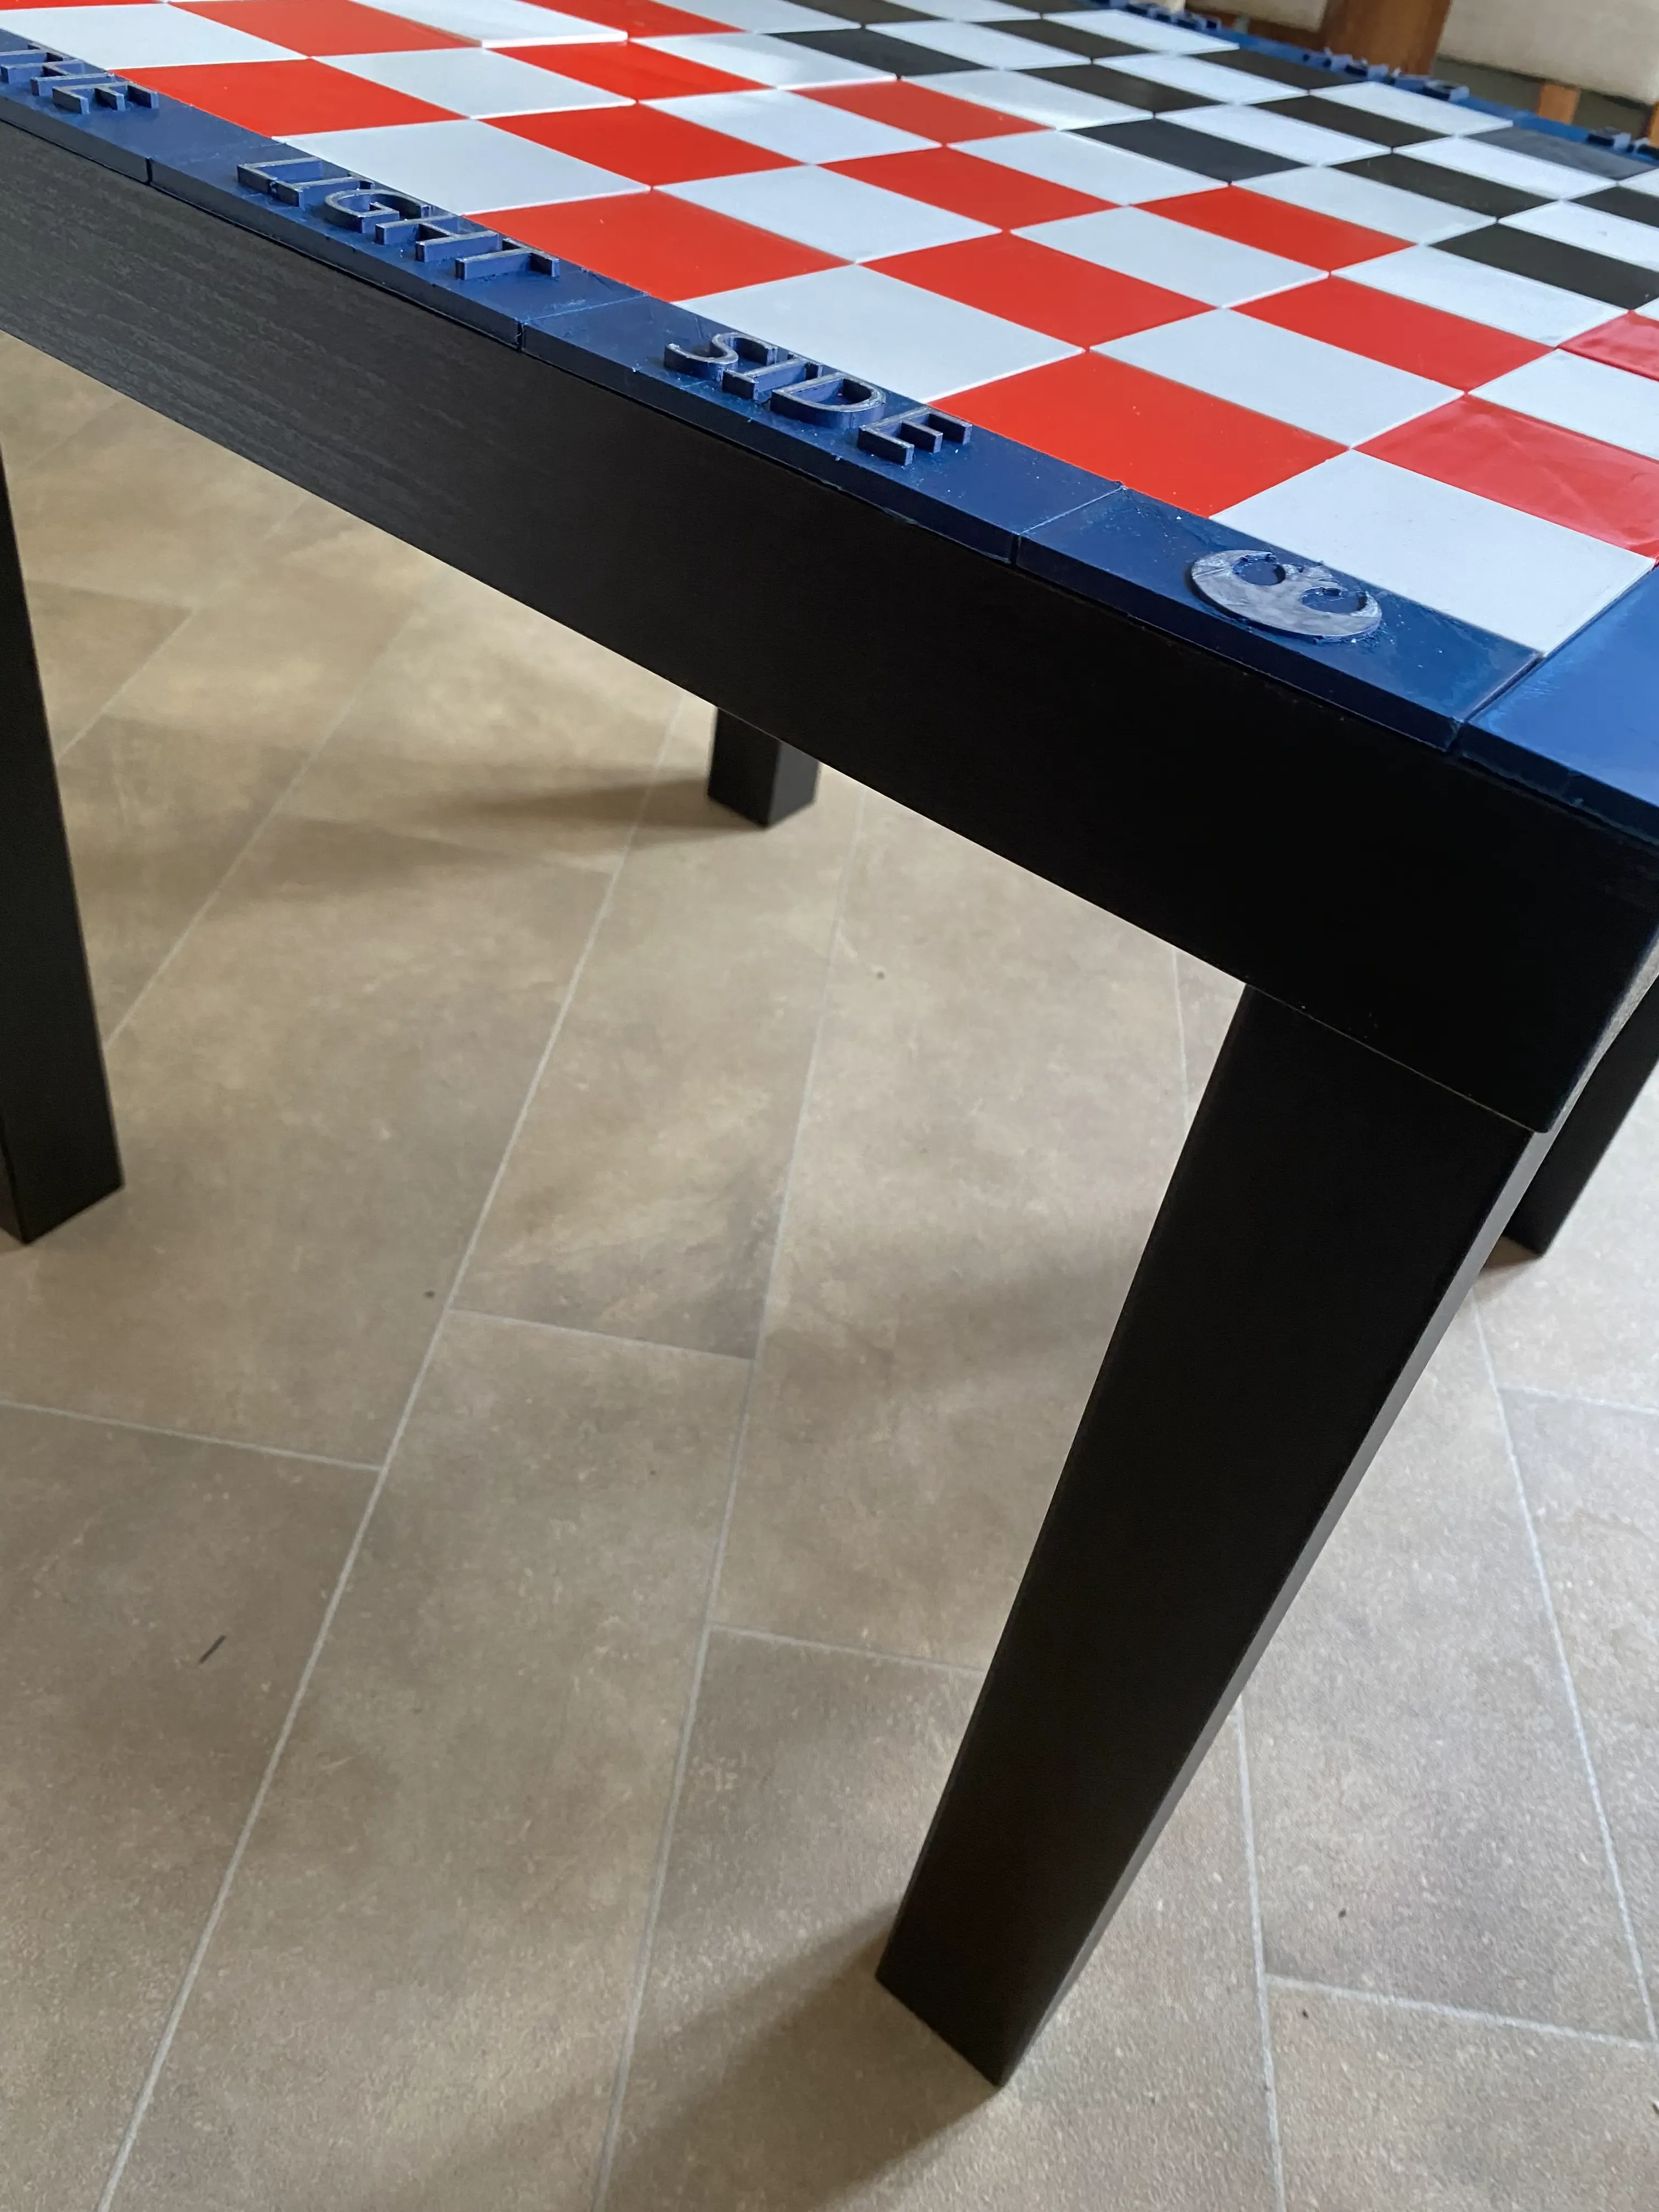 Star Wars Chess Table Project - IKEA Lack